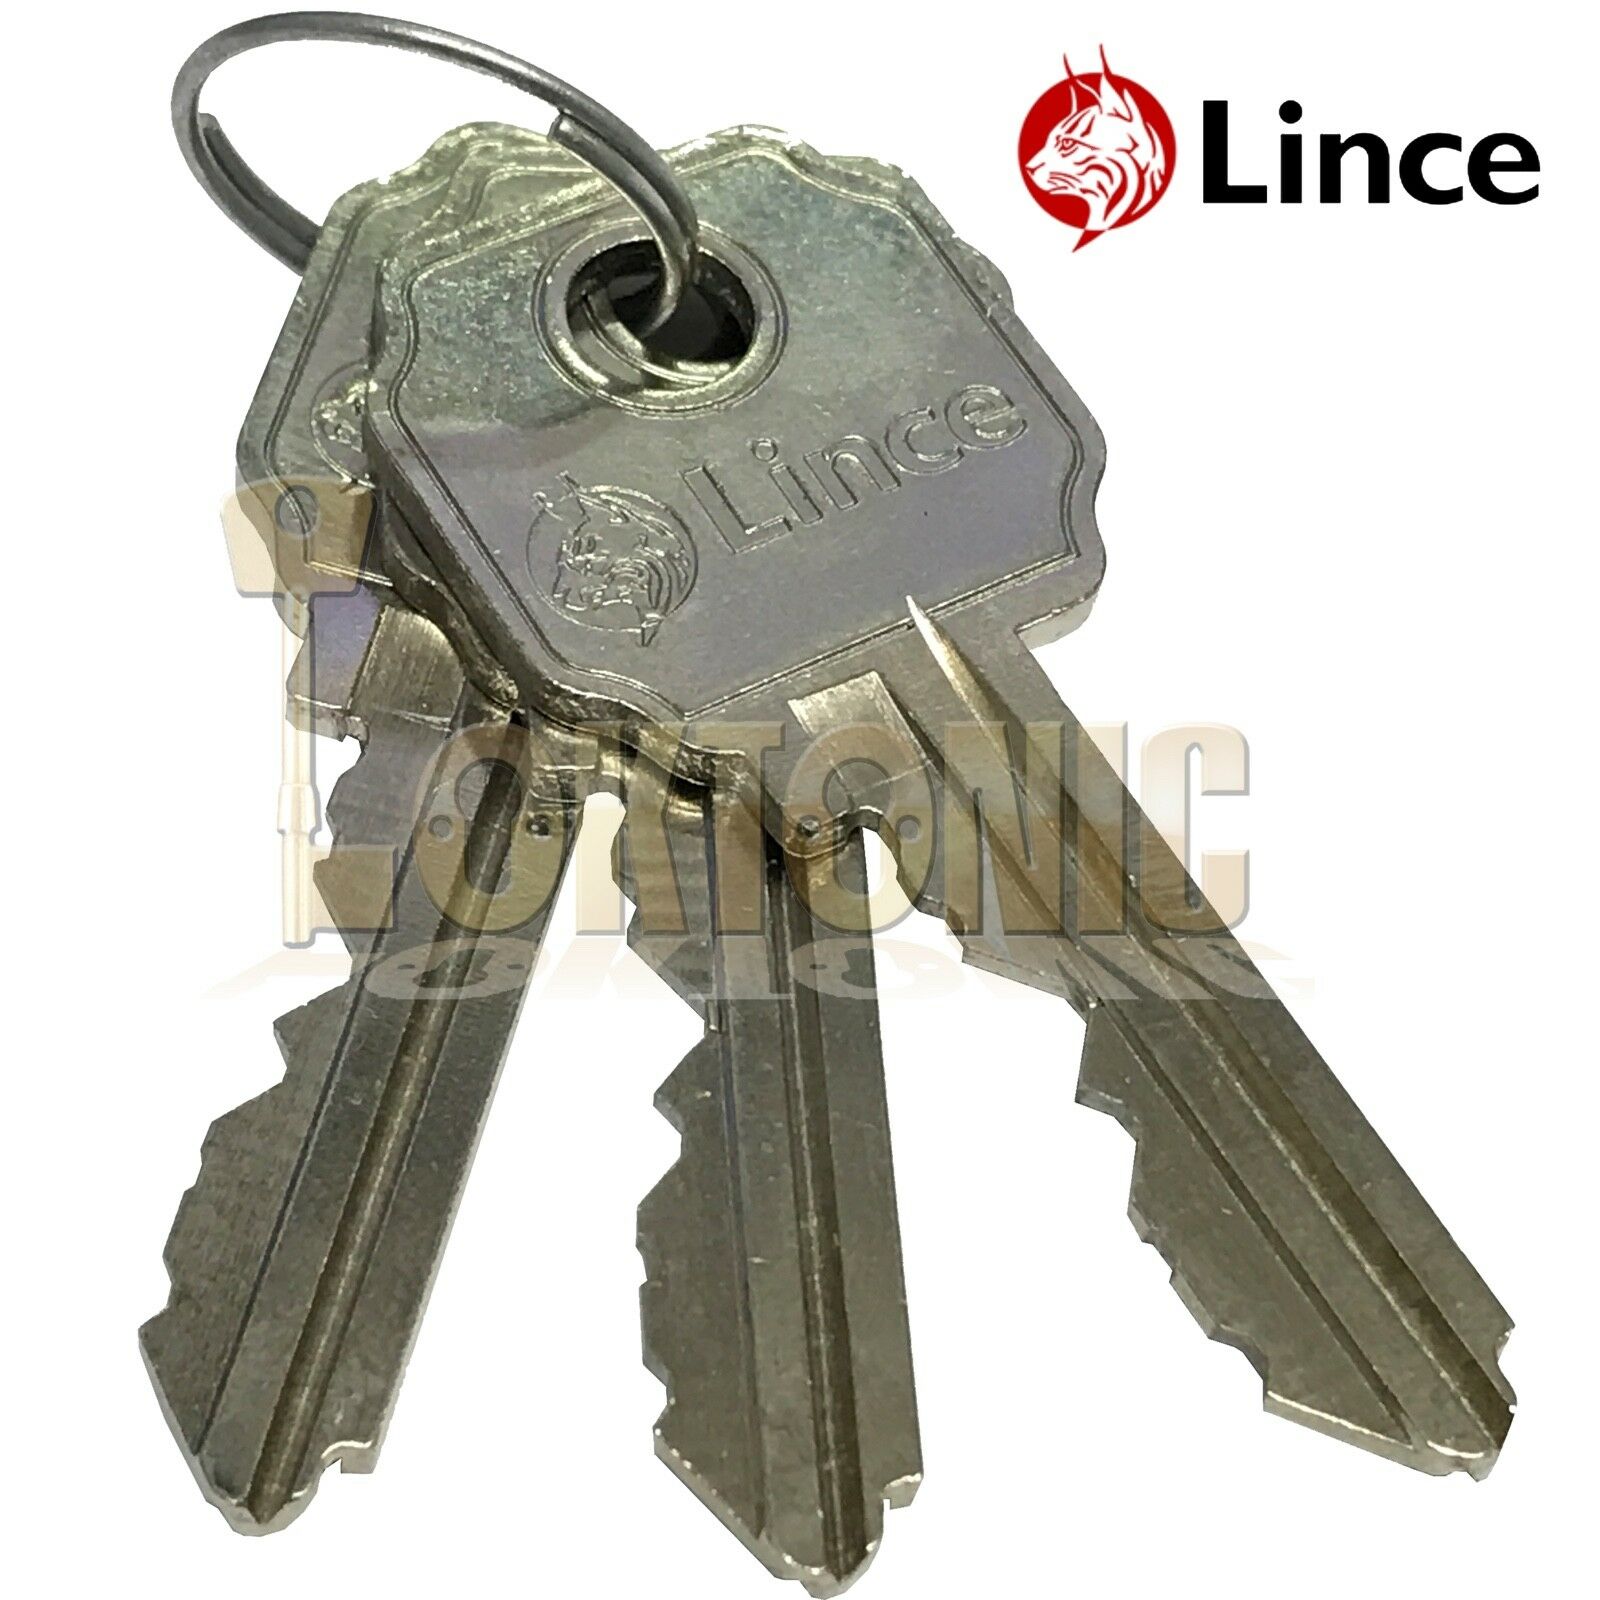 Lince High Security Quality Door Gate Shed Sliding Heavy Duty Rim Dead Bolt Lock 